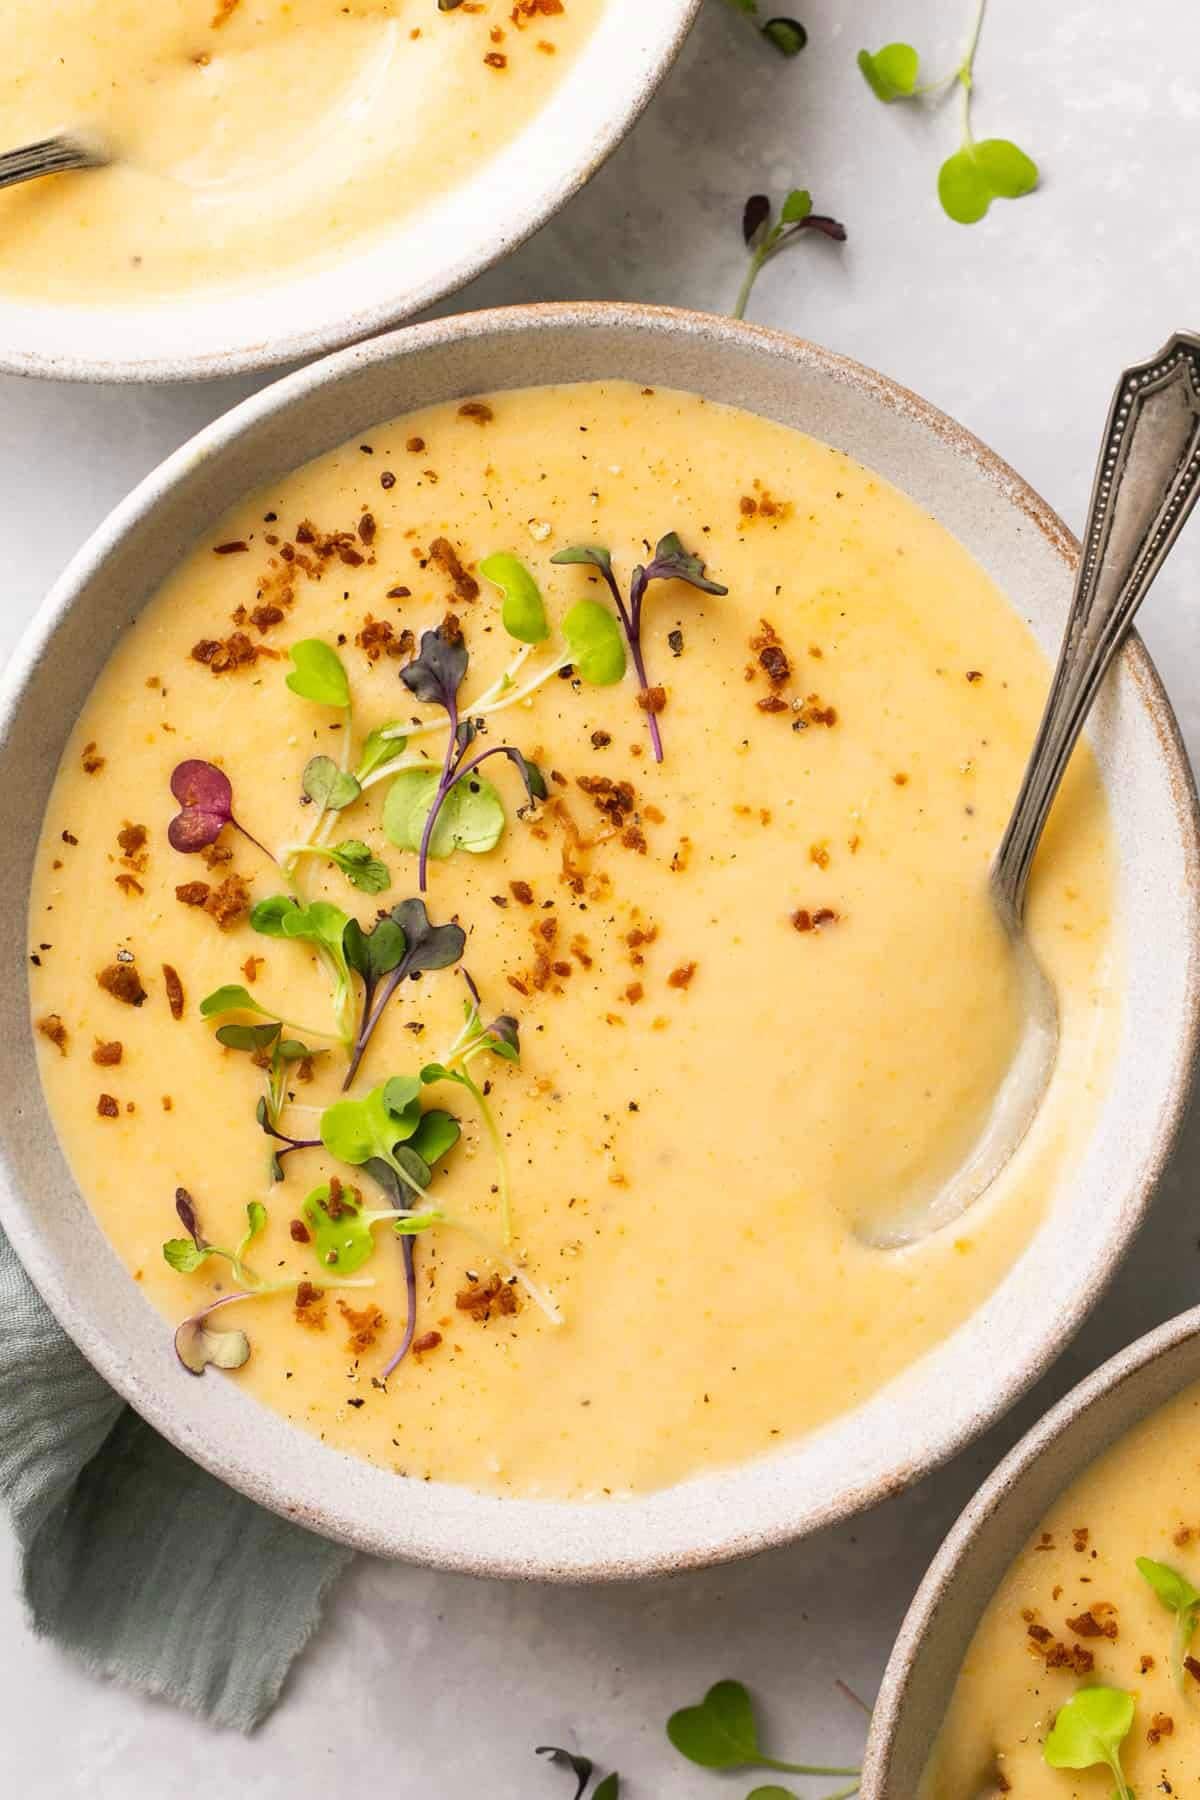 A bowl of silky smooth potato soup with herb garnish